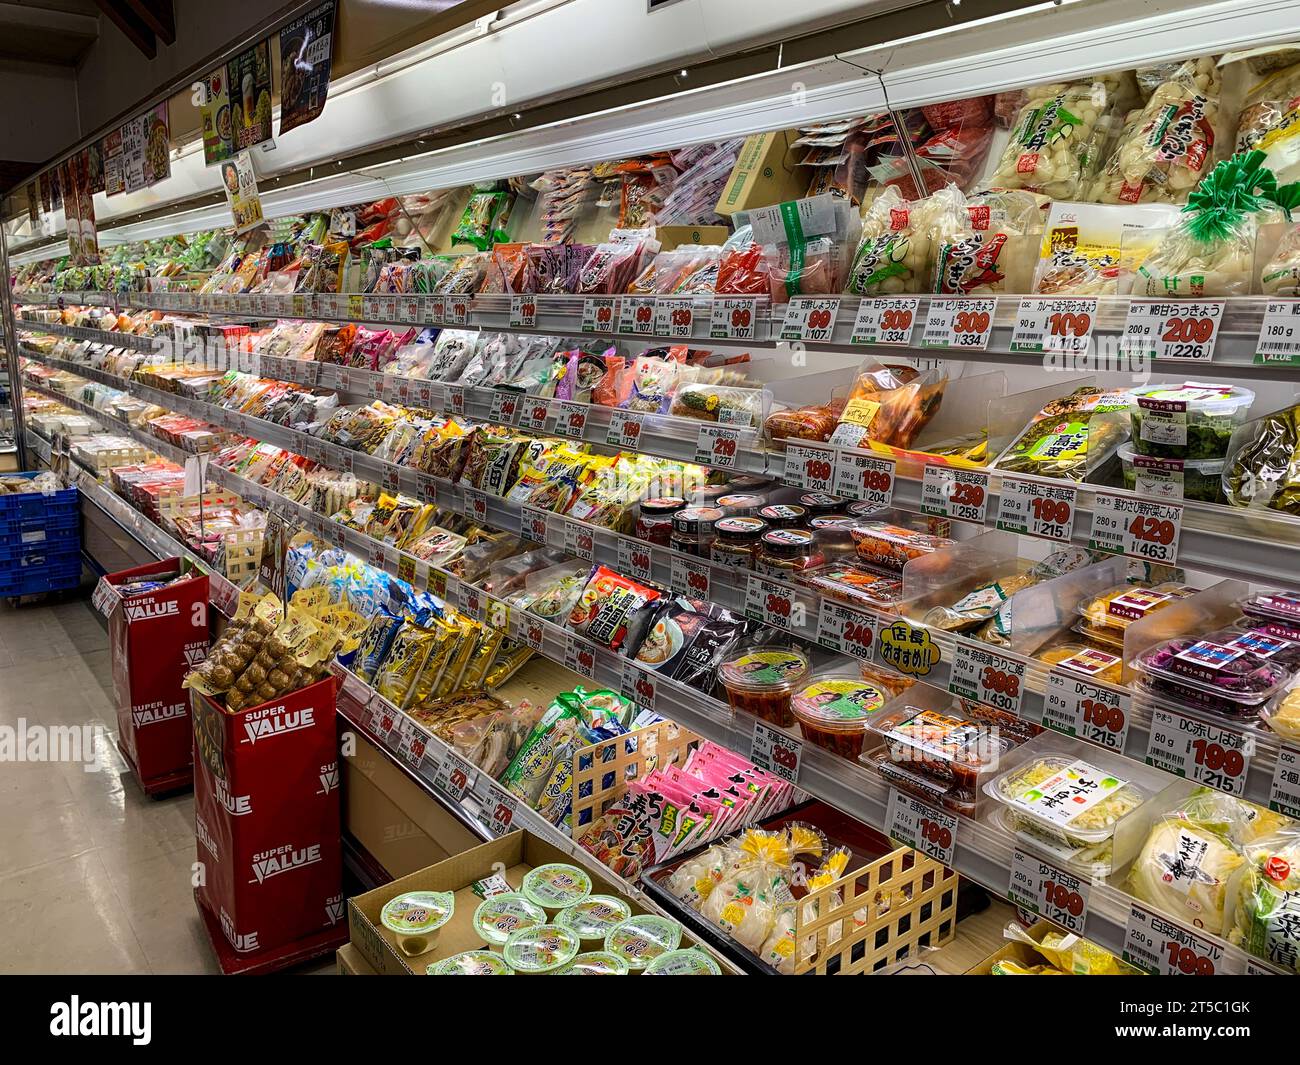 Japan, Kyushu, Imi. Small Grocery Store, Snacks and Convenience Food. Stock Photo